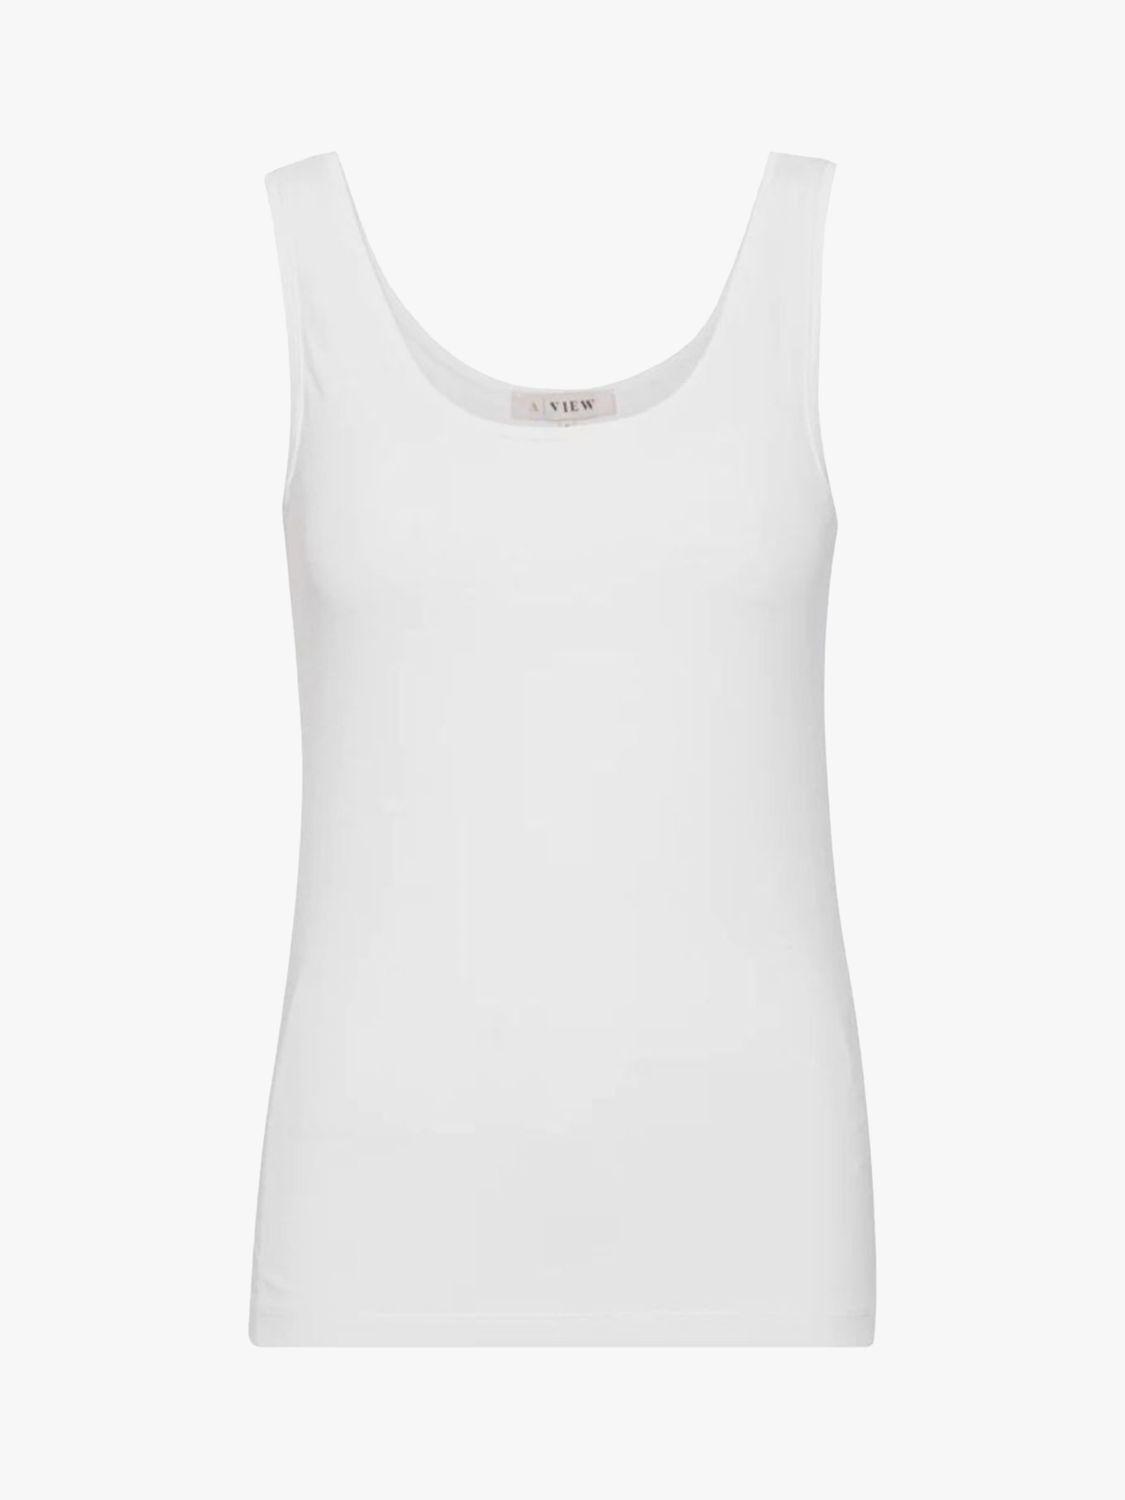 A-VIEW Stabil Tank Top, White at John Lewis & Partners